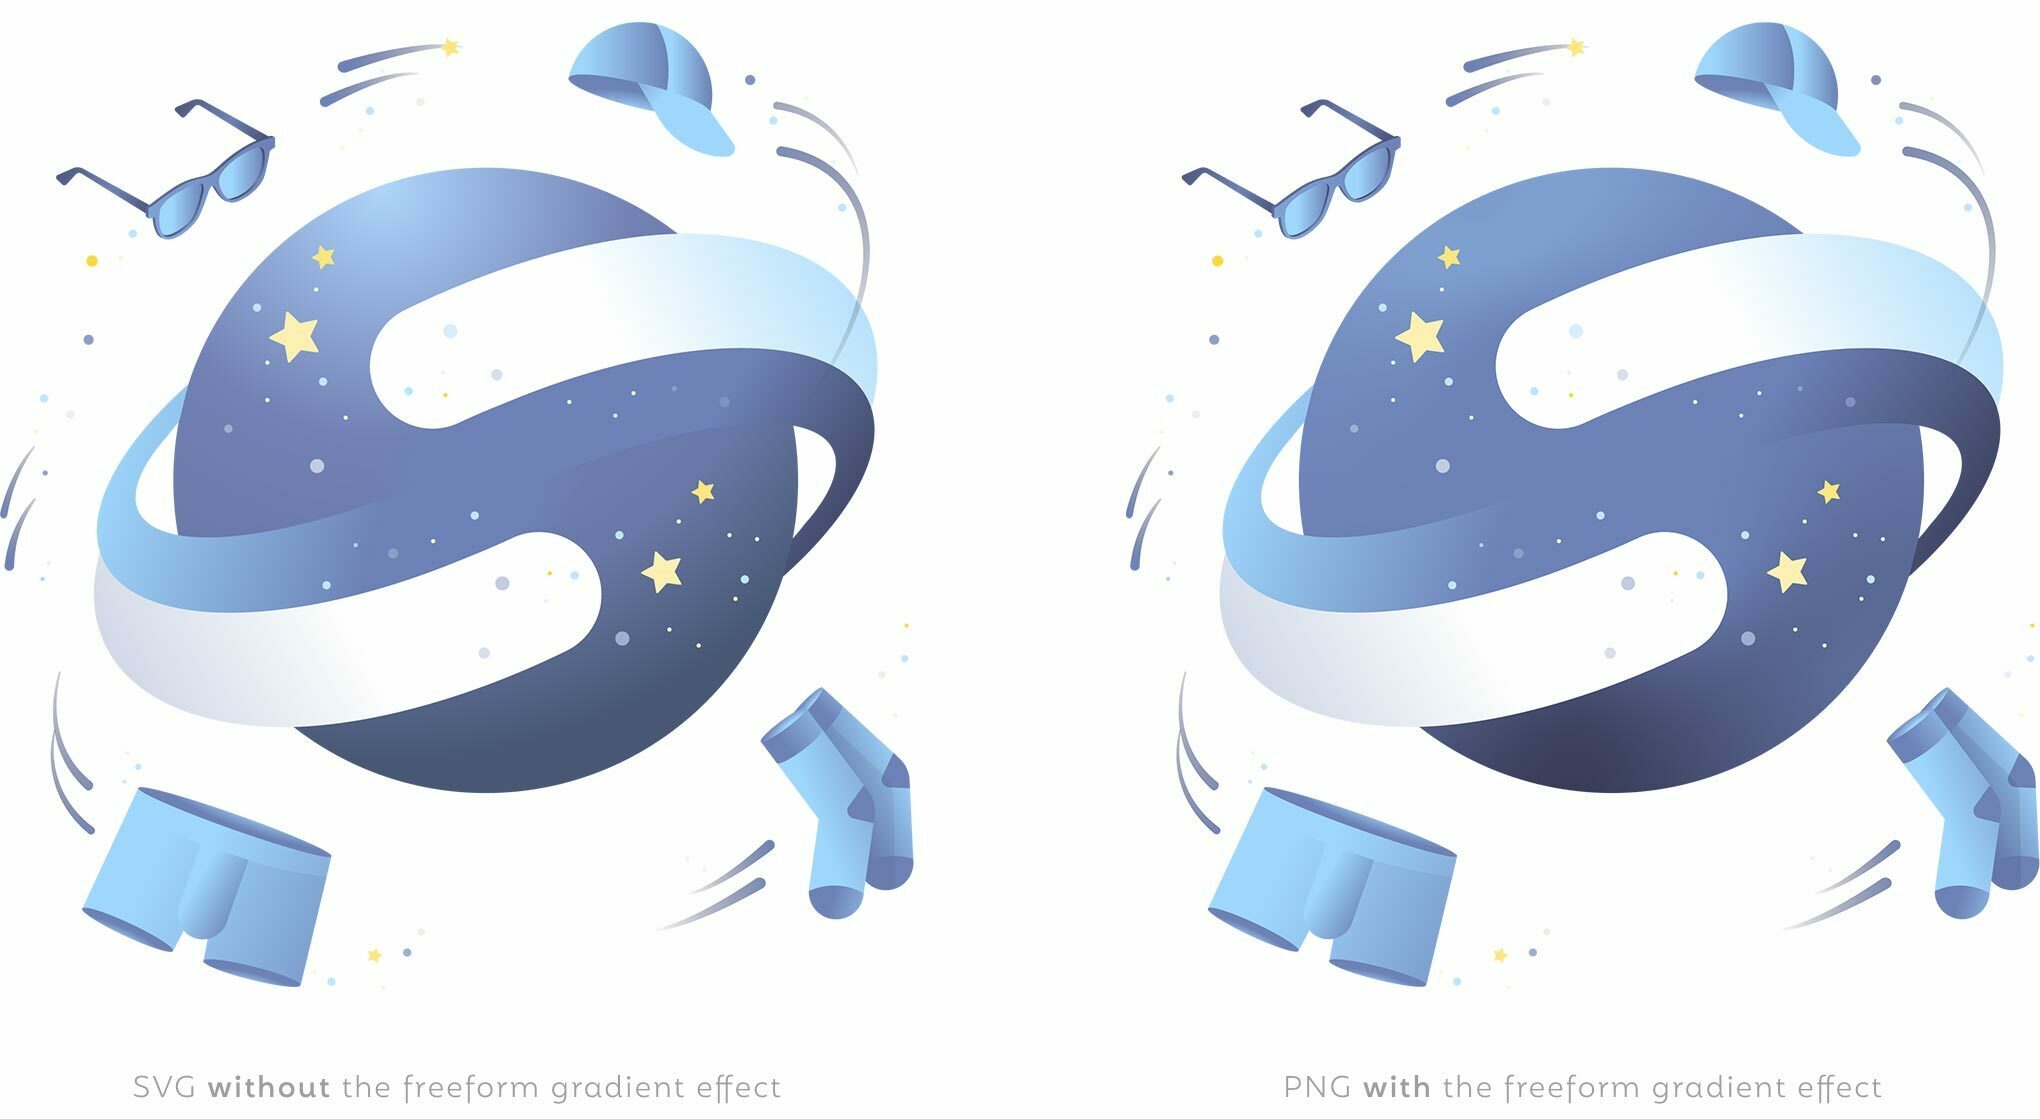 2 versions side by side with on the left icon without the freeform gradient and on the right with the freeform gradient applied